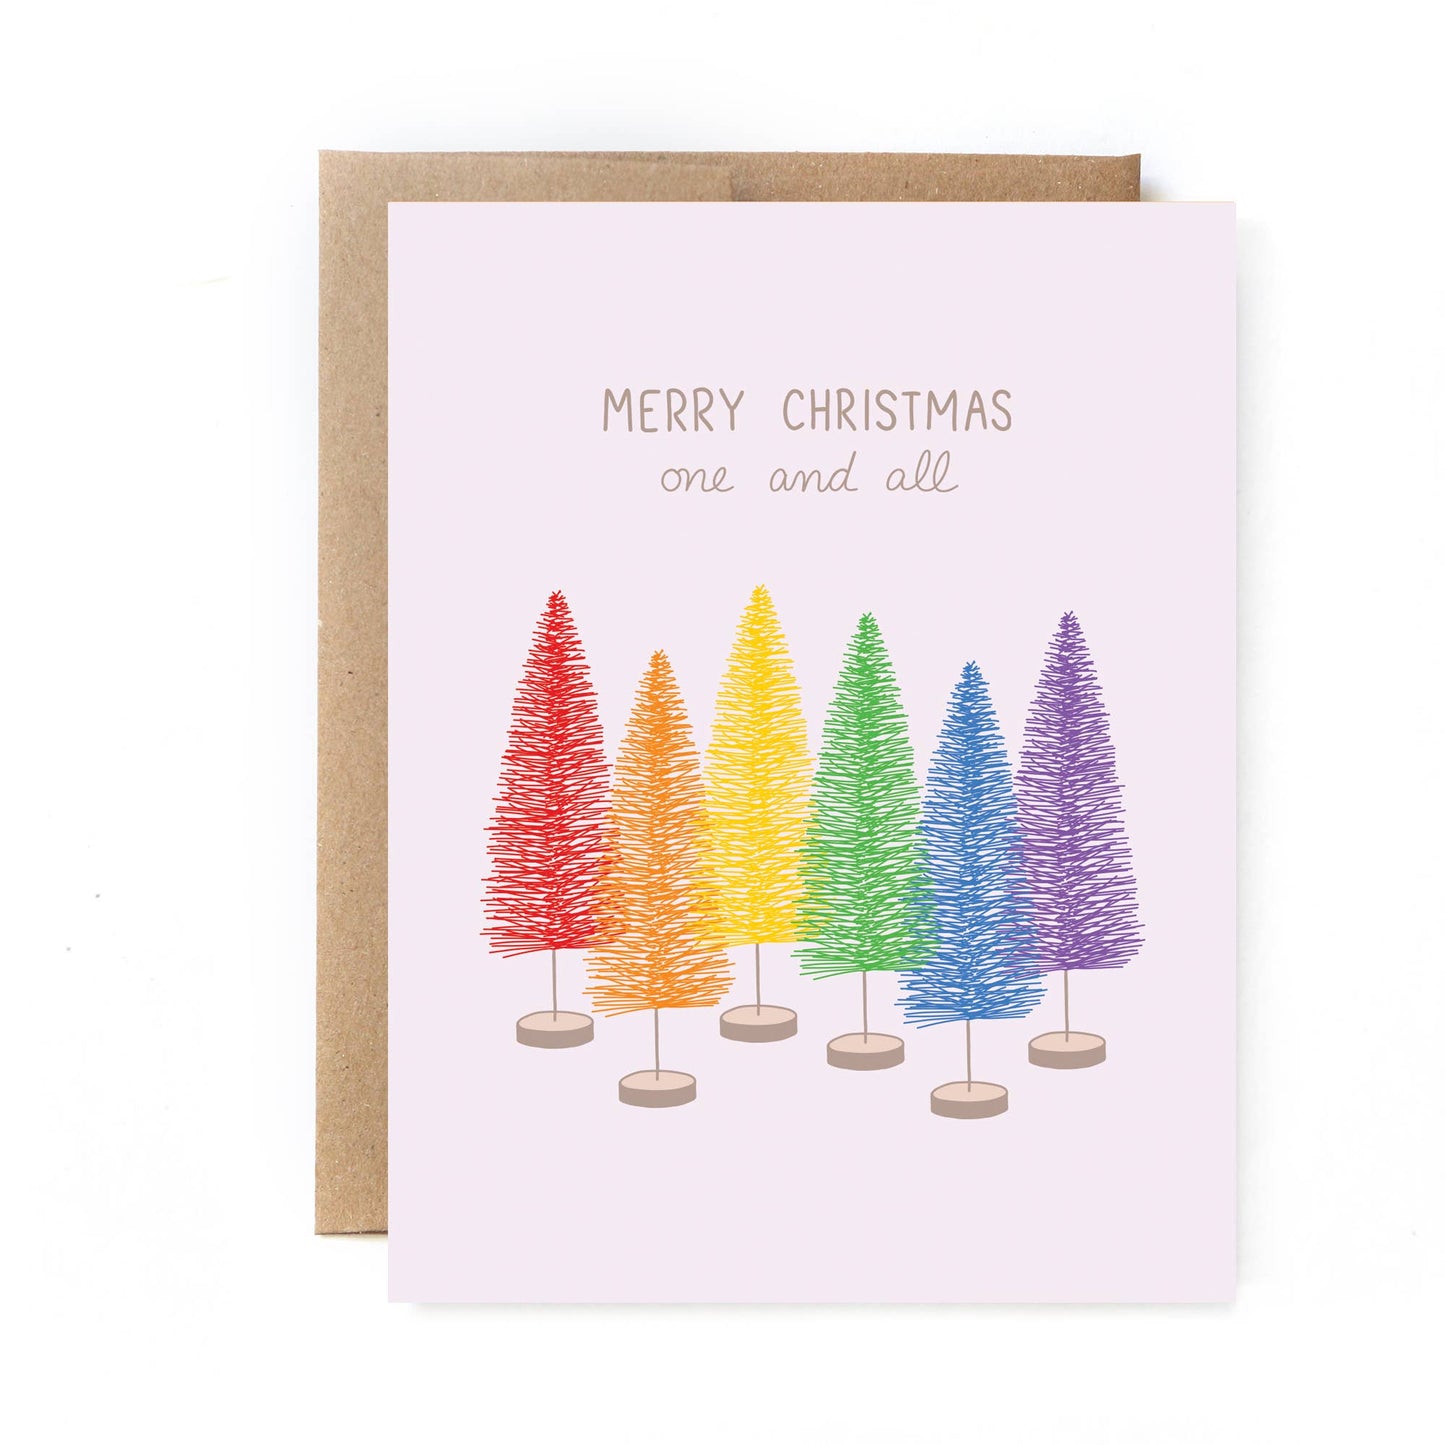 Inclusive Christmas Card - One and All